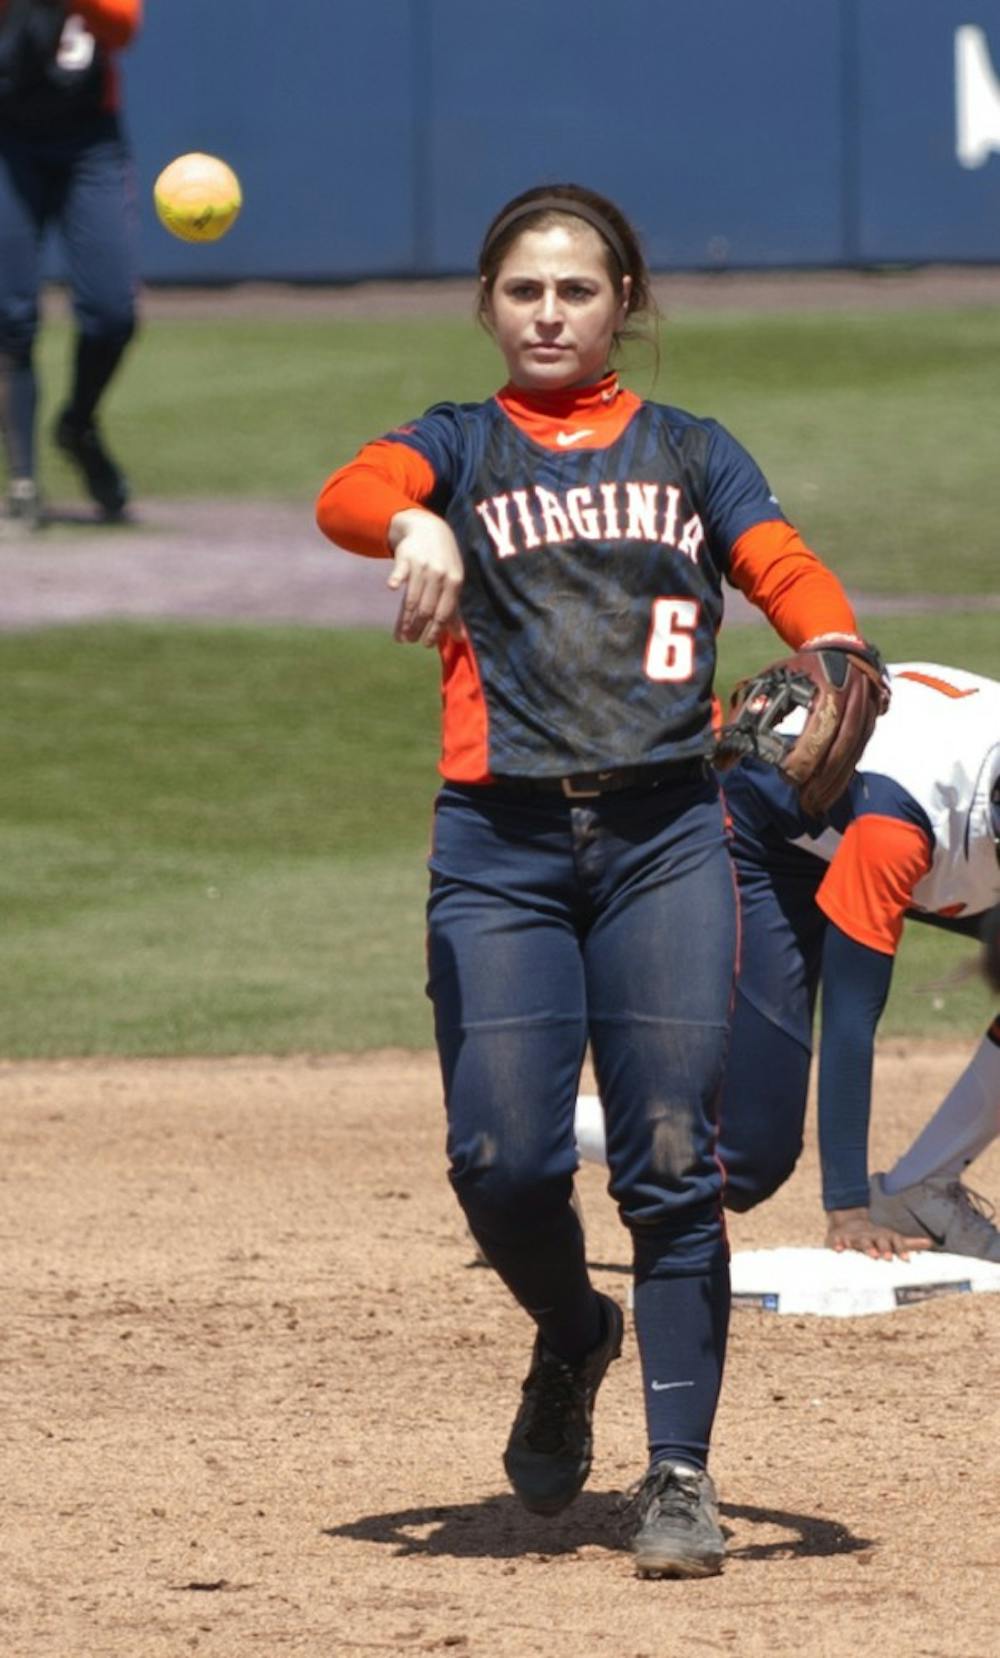 Freshman shortstop Allie Arneson hit a solo homerun in Virginia's opening win Saturday. The Cavaliers lost the next two games against Syracuse to drop the series.